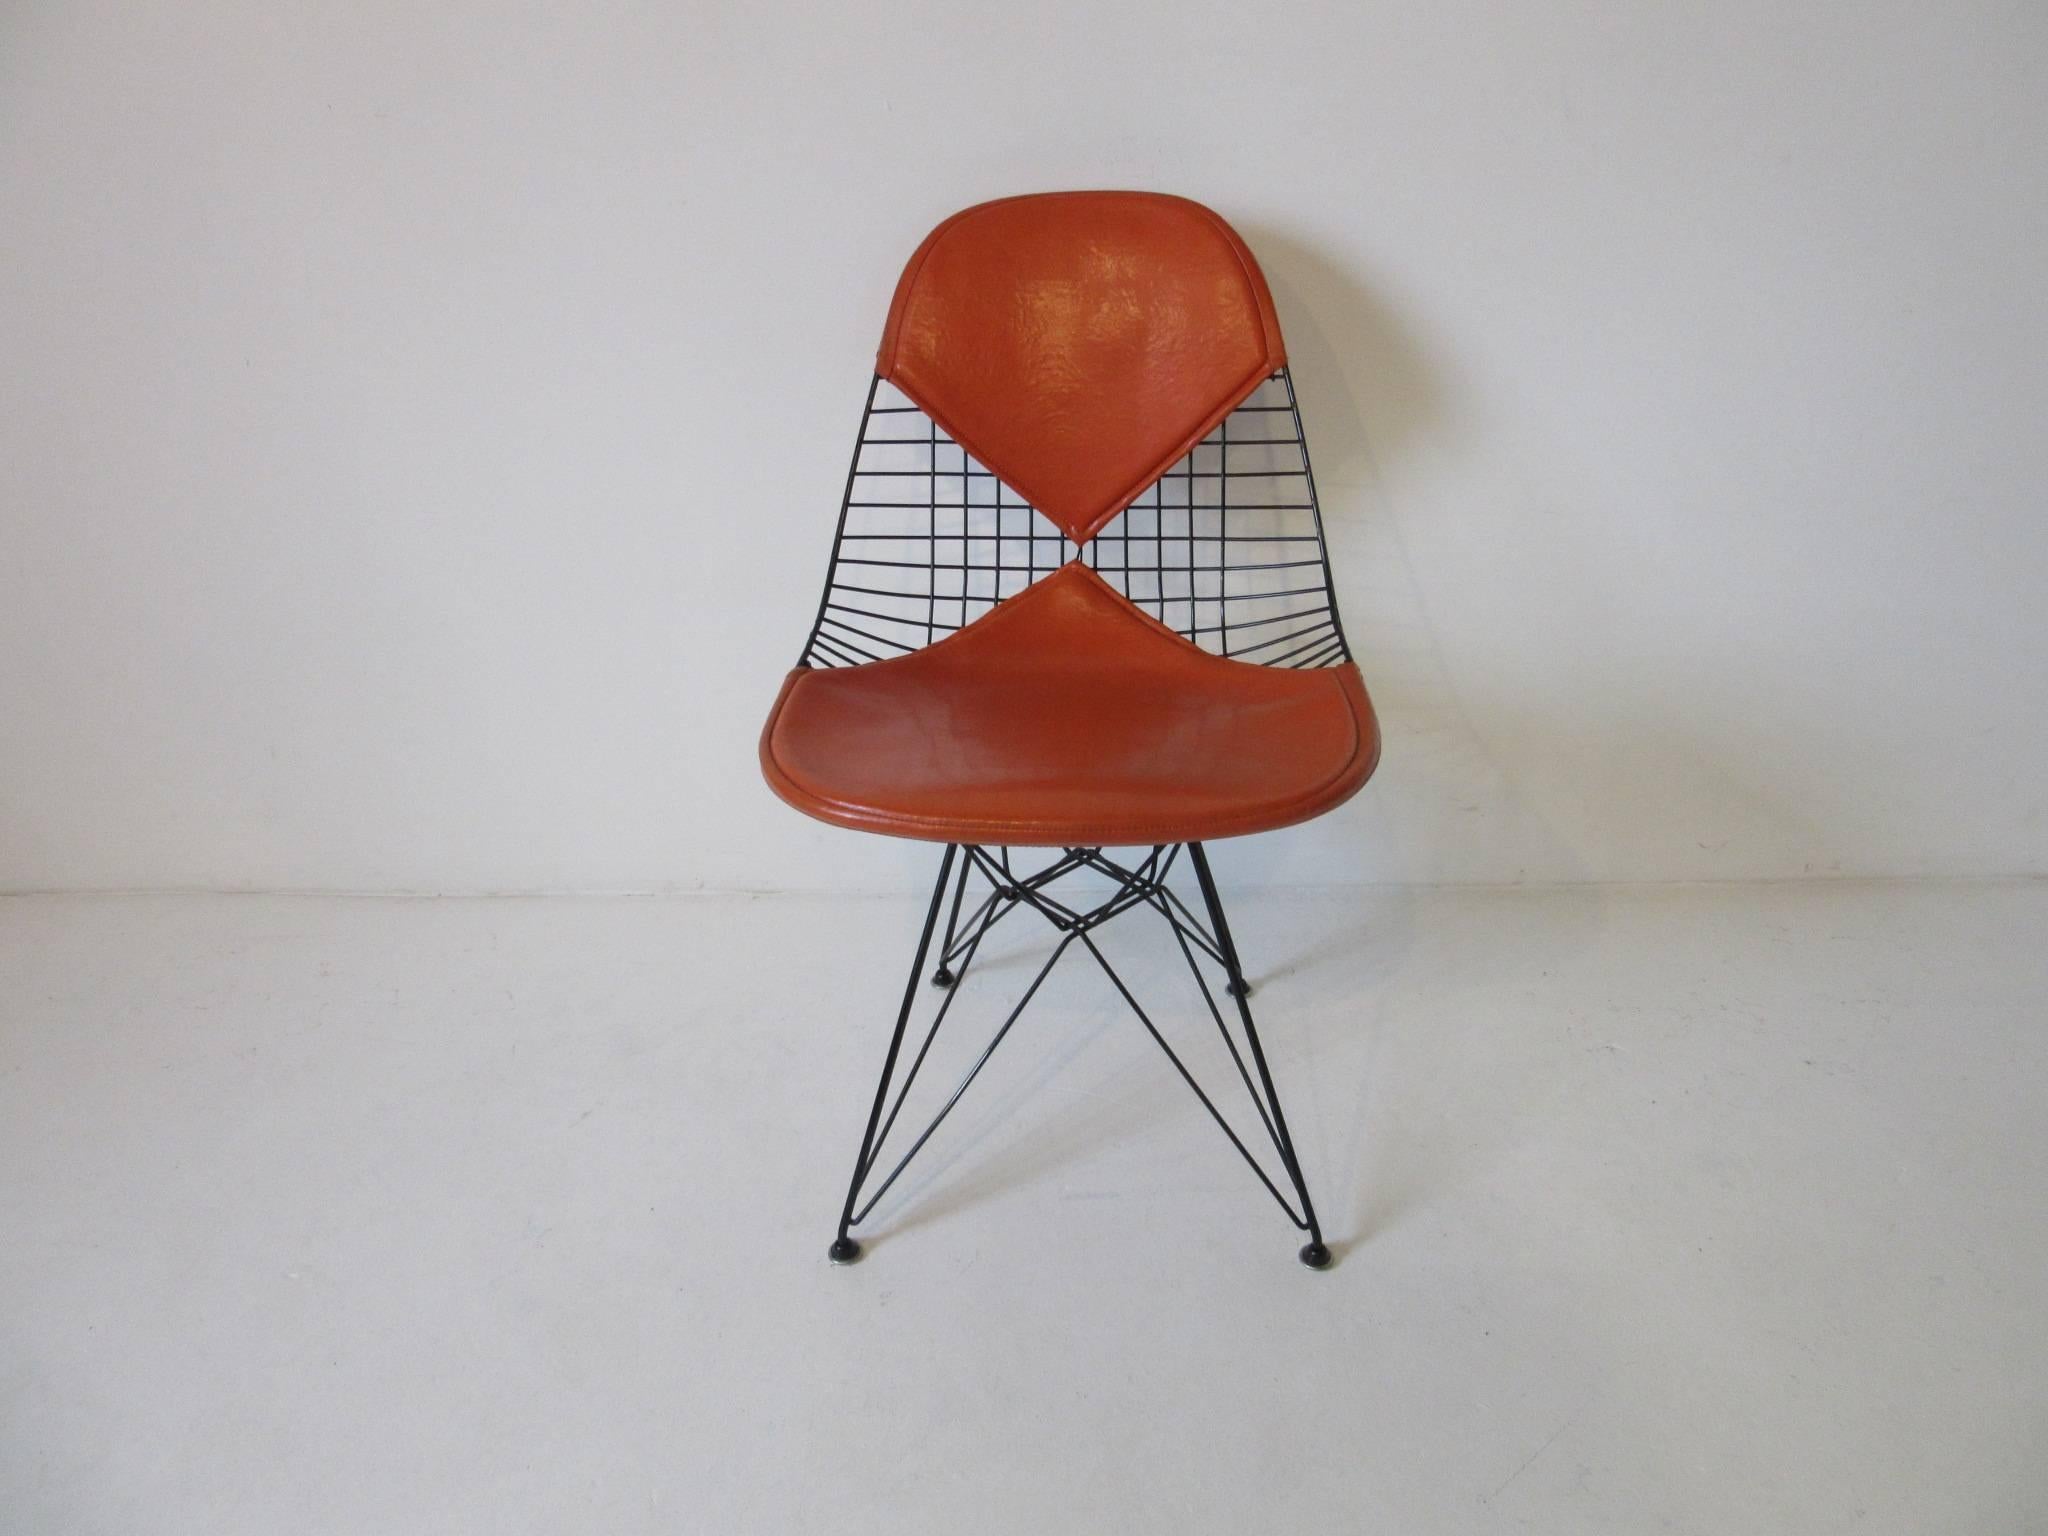 A set of four Eiffel tower based Eames welded wire dining chairs with upholstered orange Naugahyde Bikini seat pads. Earlier production with the self-leveling domed foot pads, manufactured by the Herman Miller furniture company.